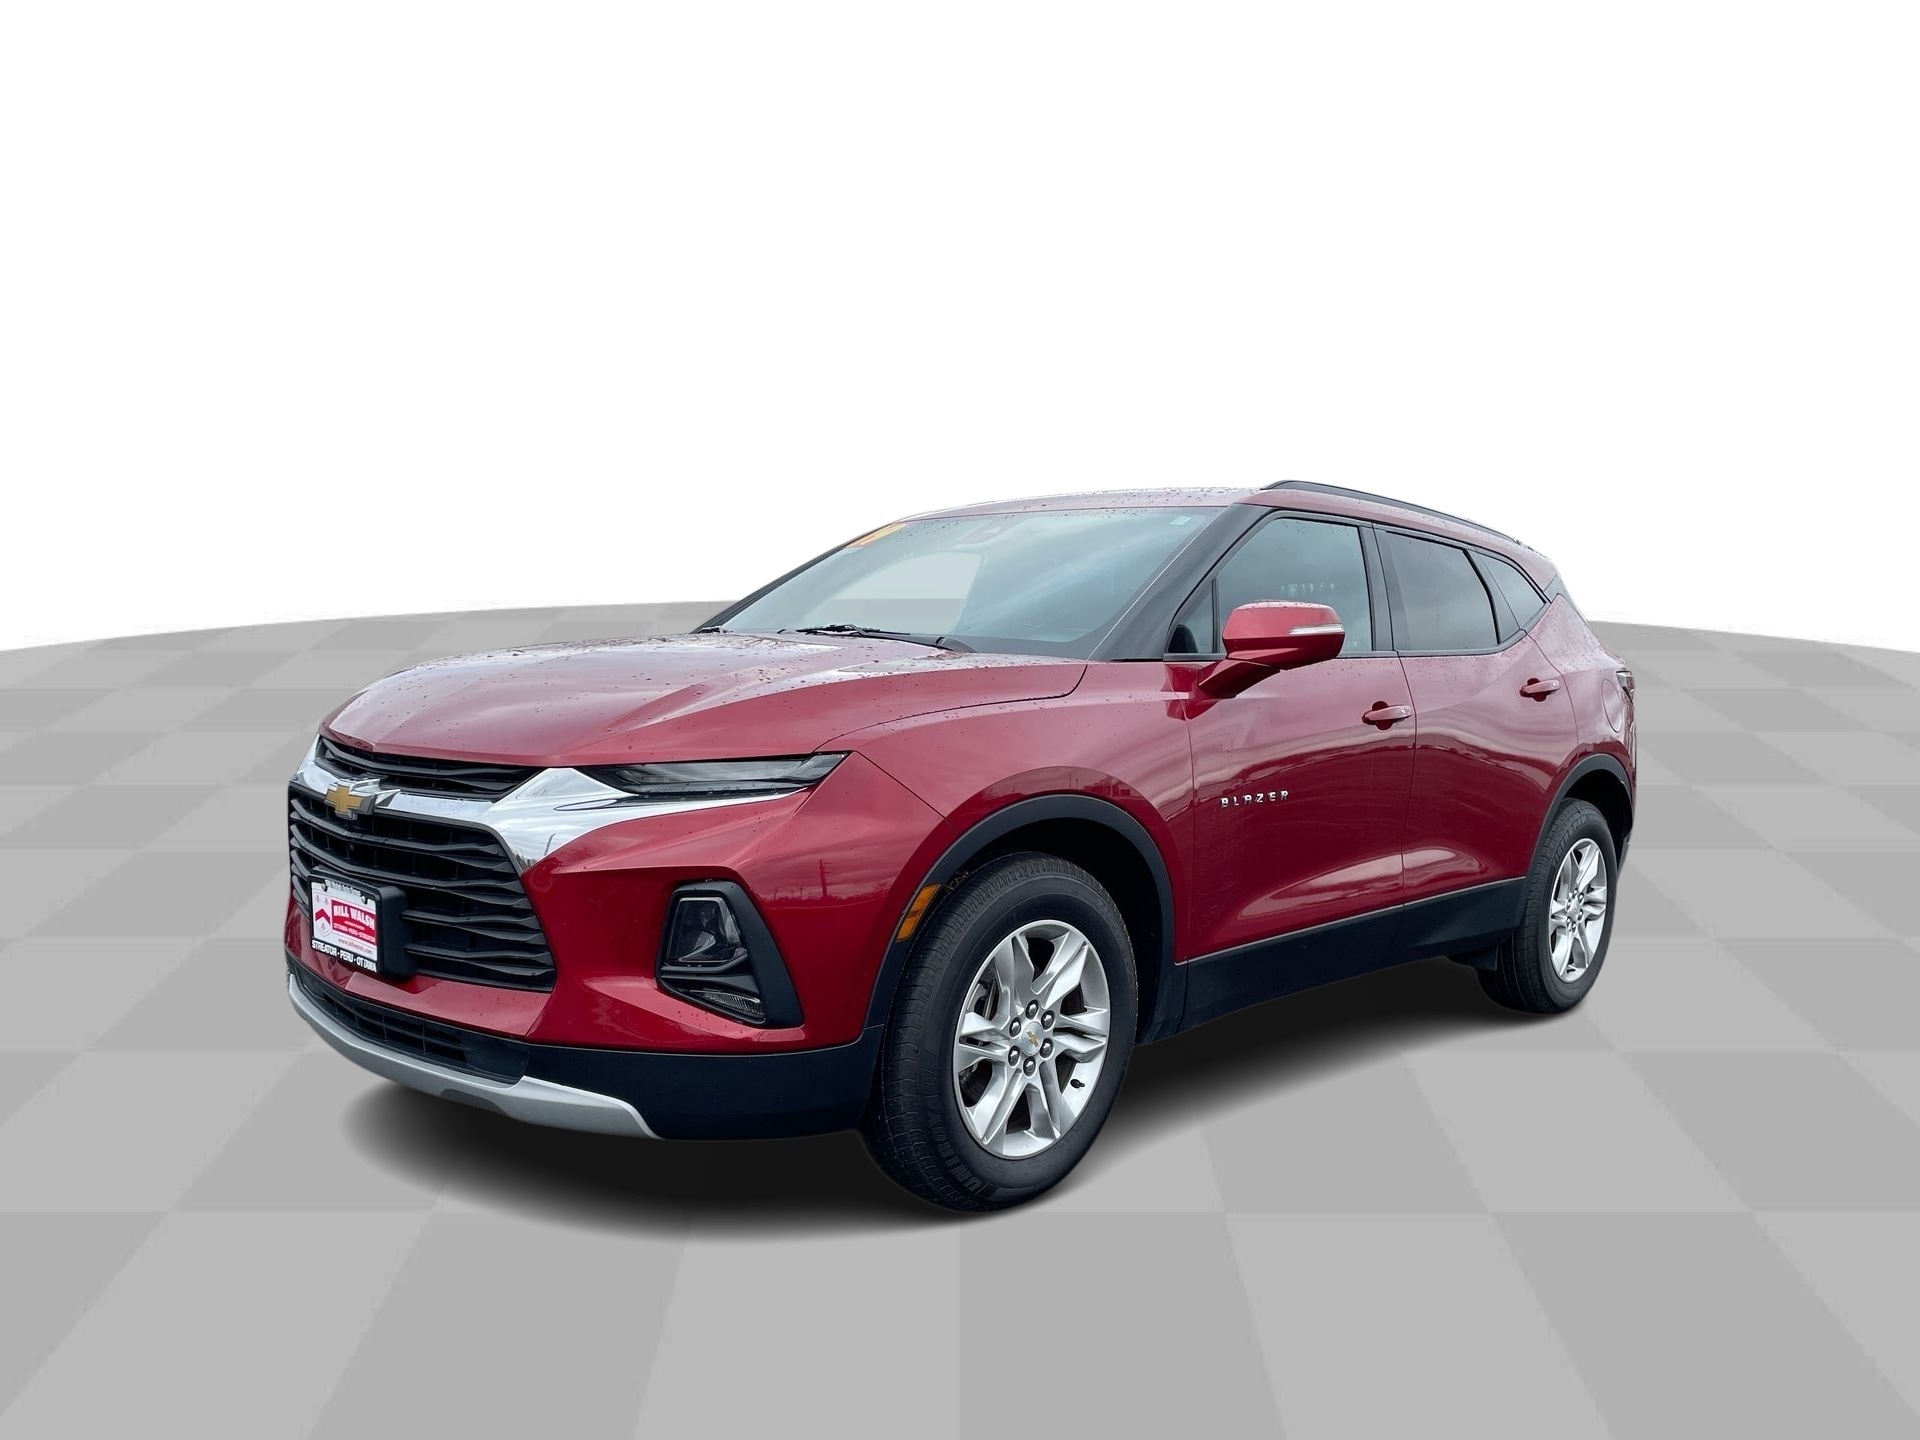 Carbravo 2019 Chevrolet Blazer For Sale at Bill Walsh Superstore